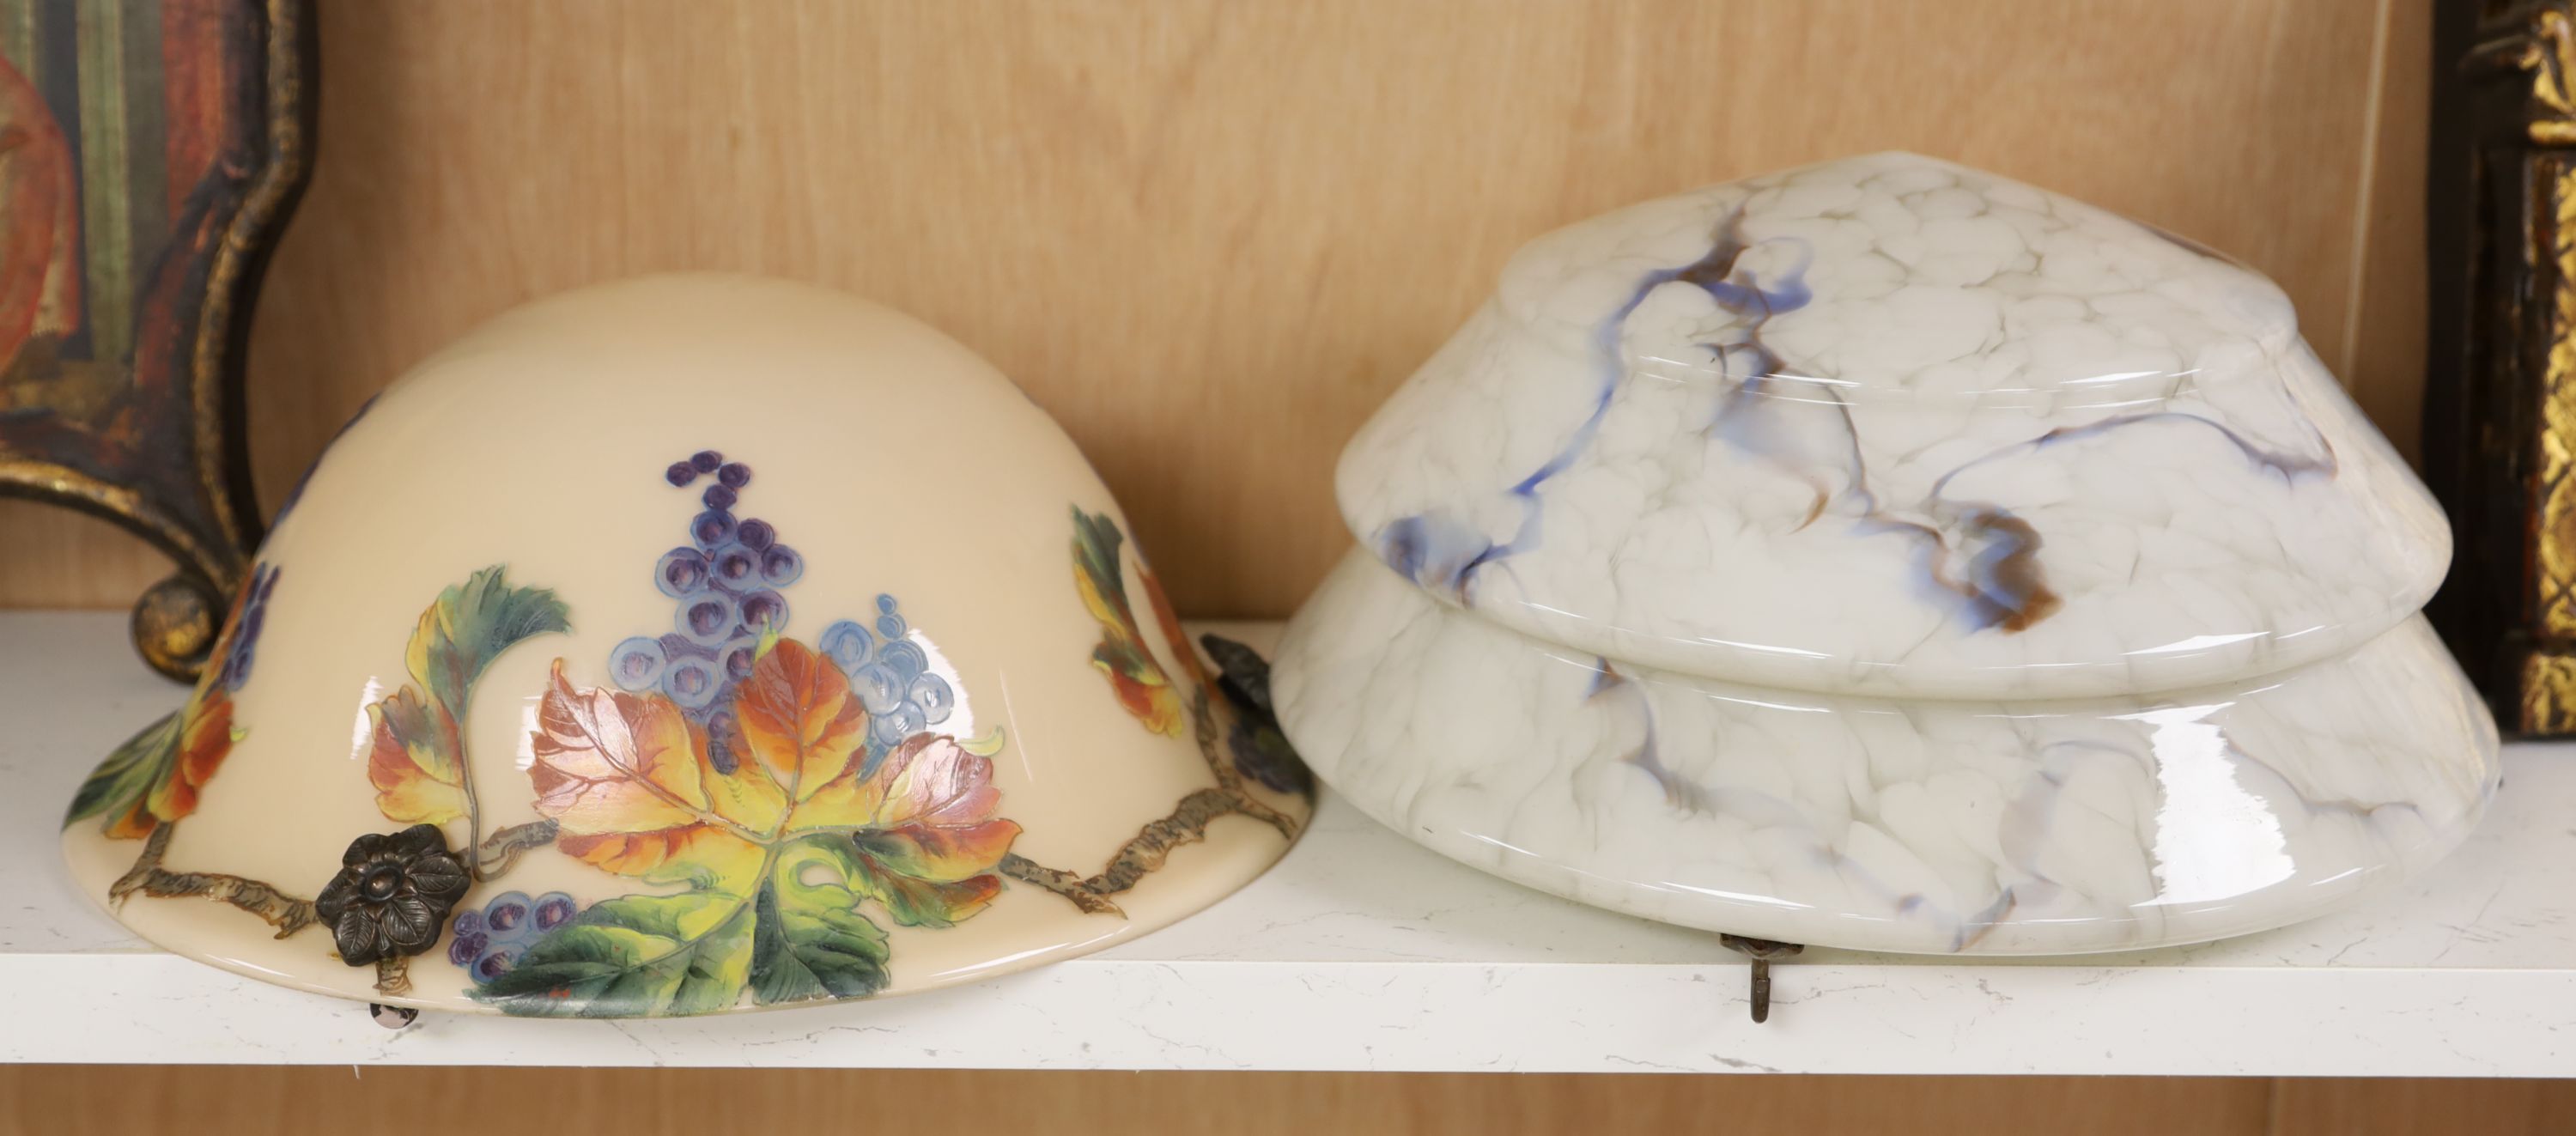 A glass floral painted French plaffonier and a marbled glass plaffonier